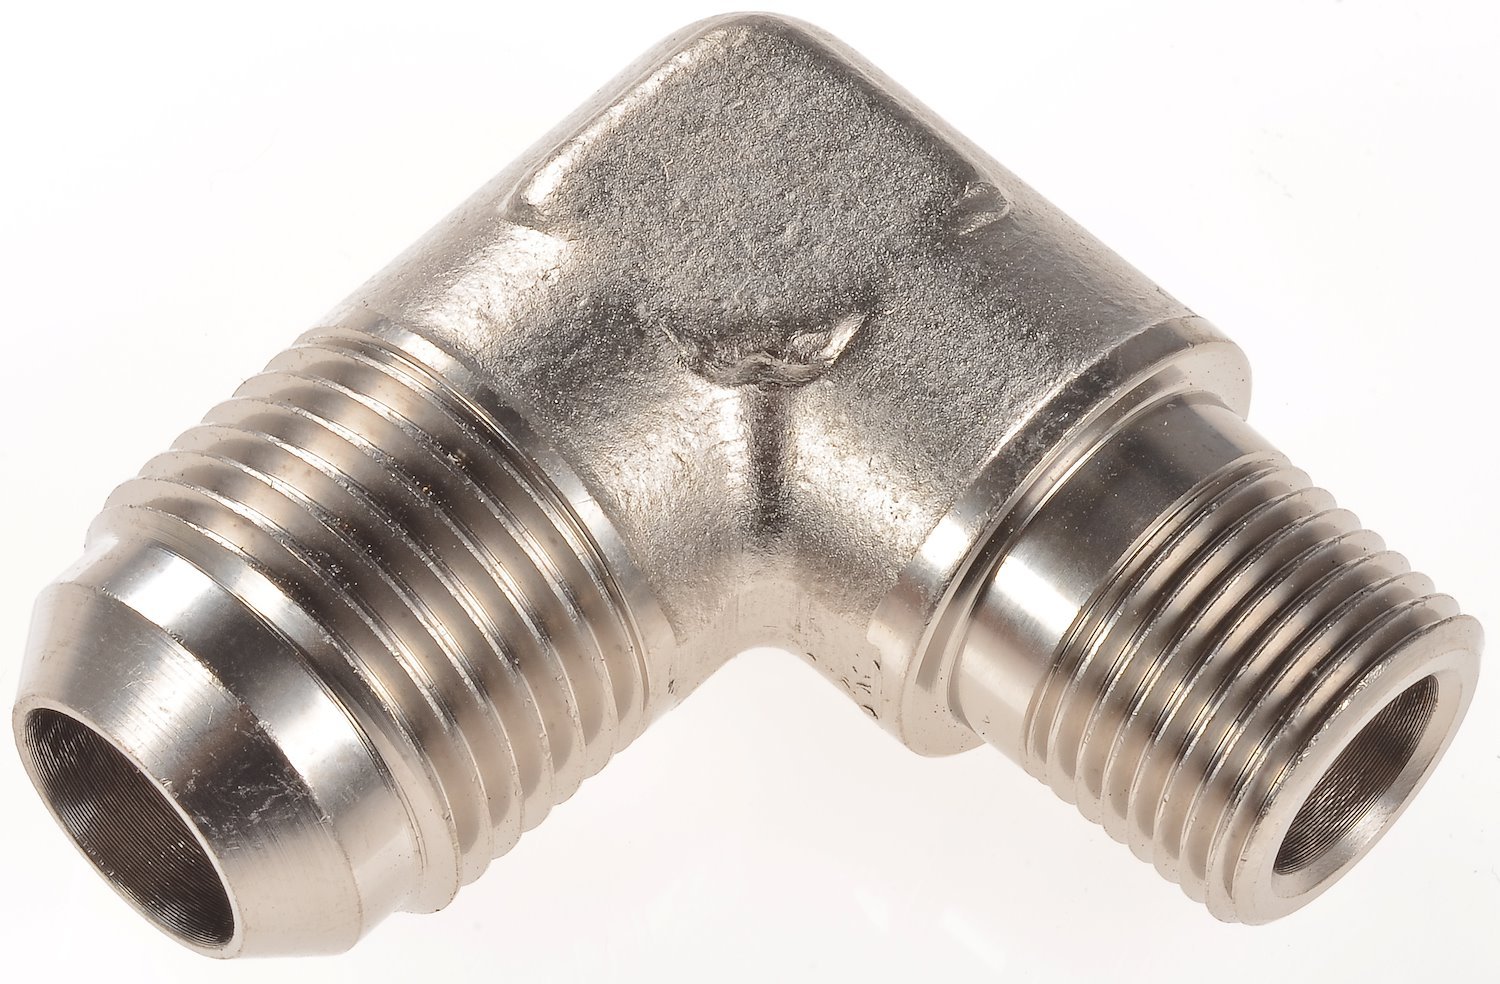 AN to NPT 90-Degree Adapter Fitting [-10 AN Male to 3/8 in. NPT Male, Nickel]